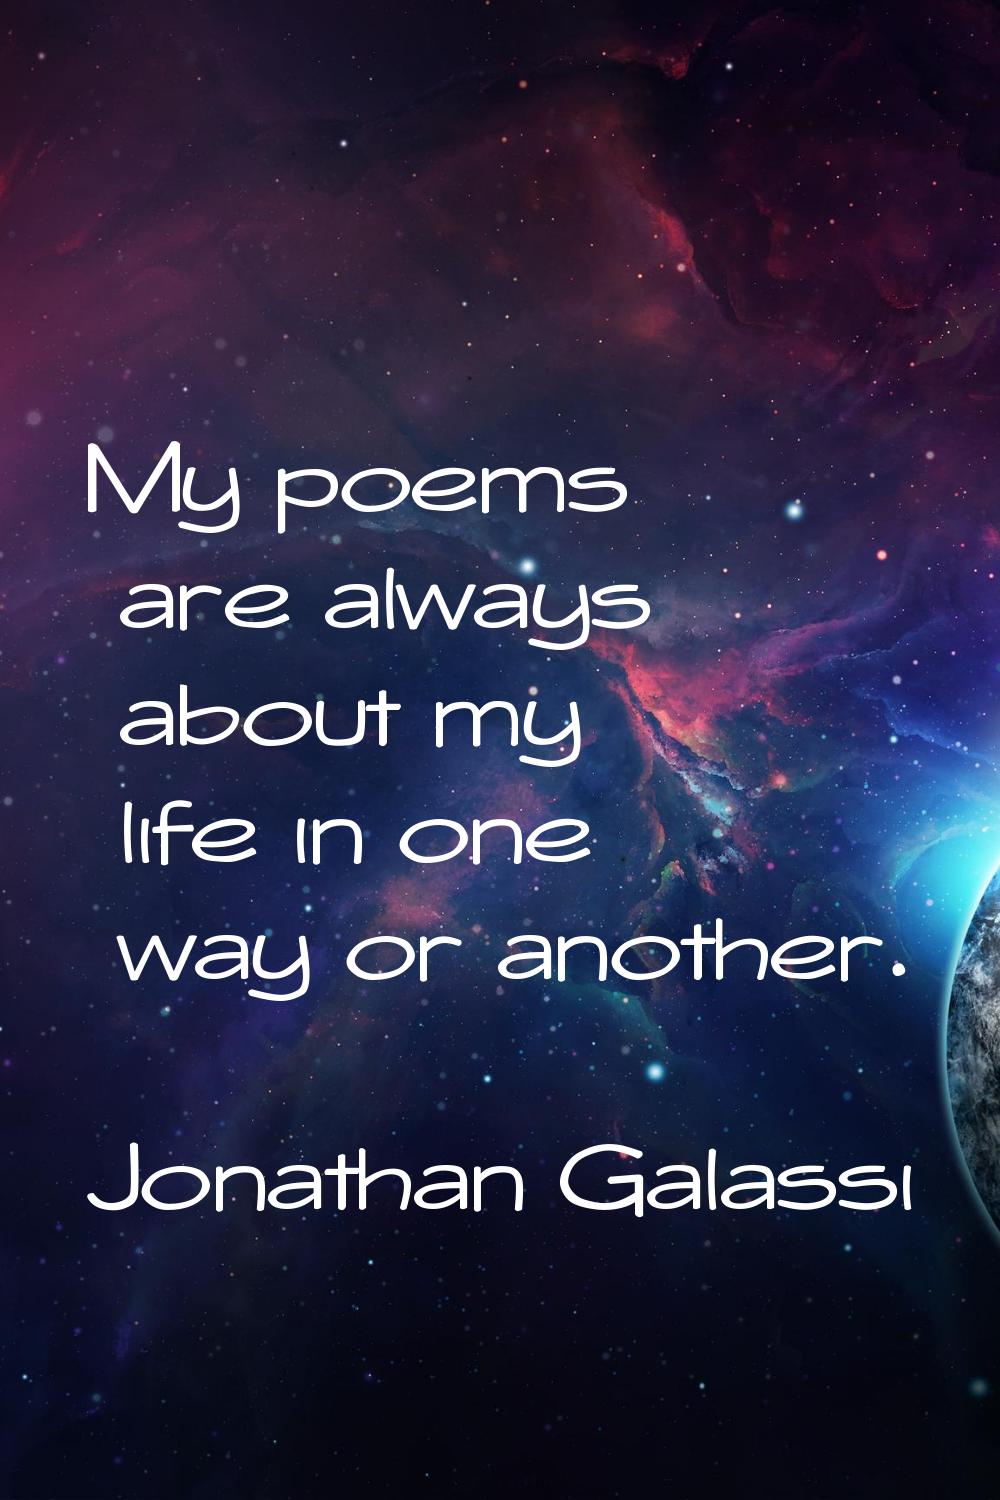 My poems are always about my life in one way or another.